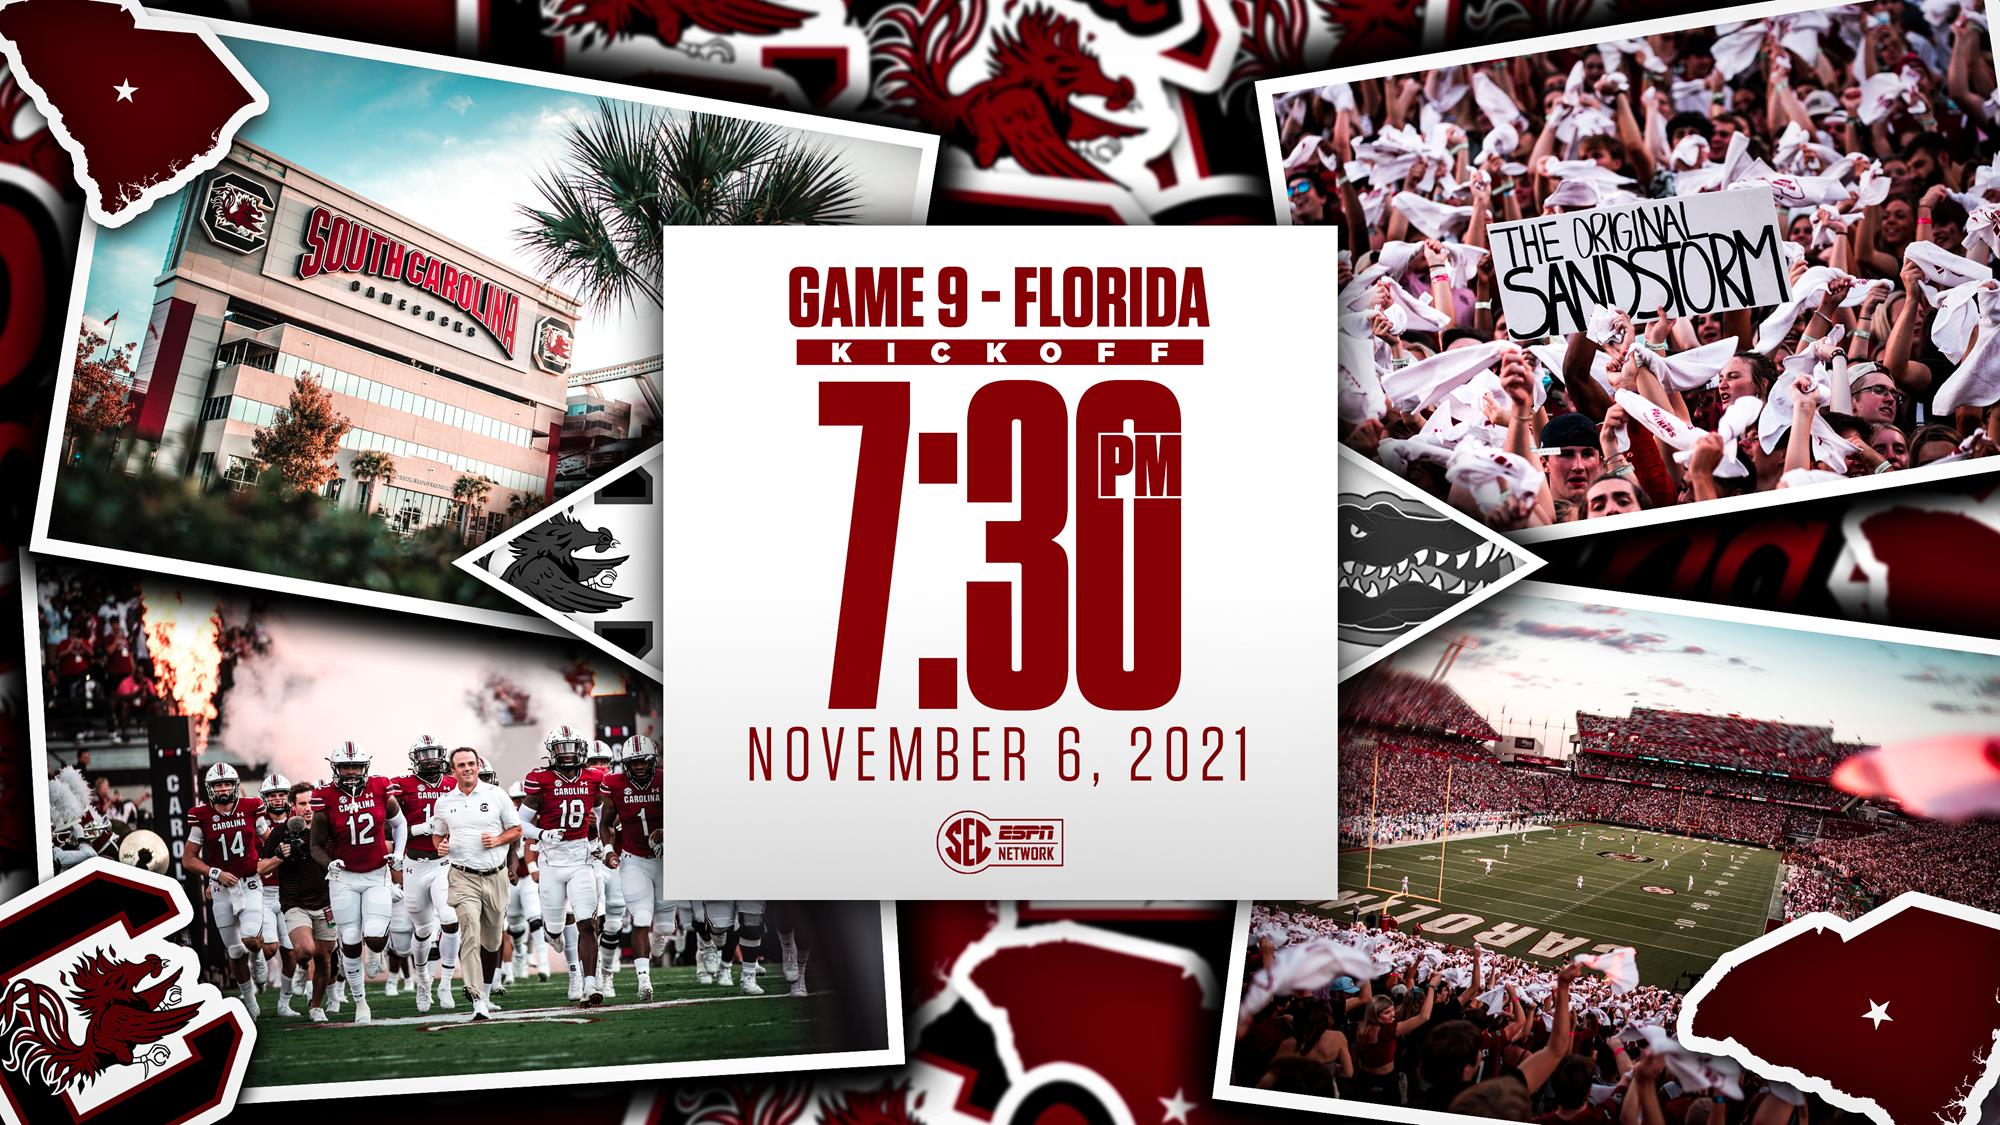 Gamecocks and Gators to Meet Under the Lights